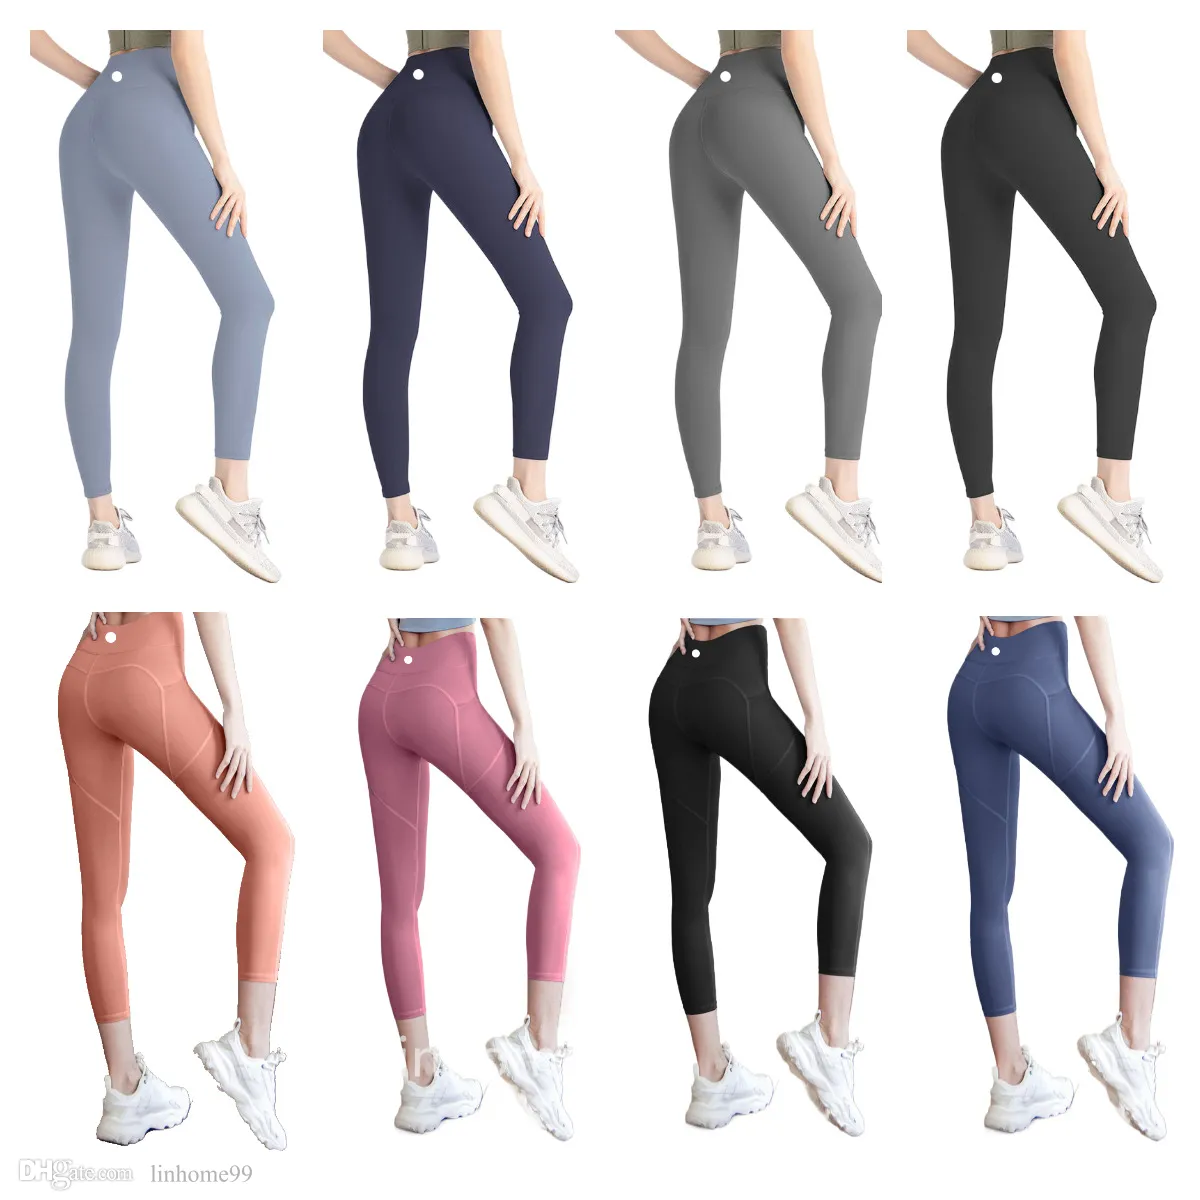 LL 2023 Yoga Lu Align Leggings Femmes Shorts Pantalons courts Tenues Lady Sports Dames Exercice Fitness Wear Filles Courir Gym Slim Fit Y0P1